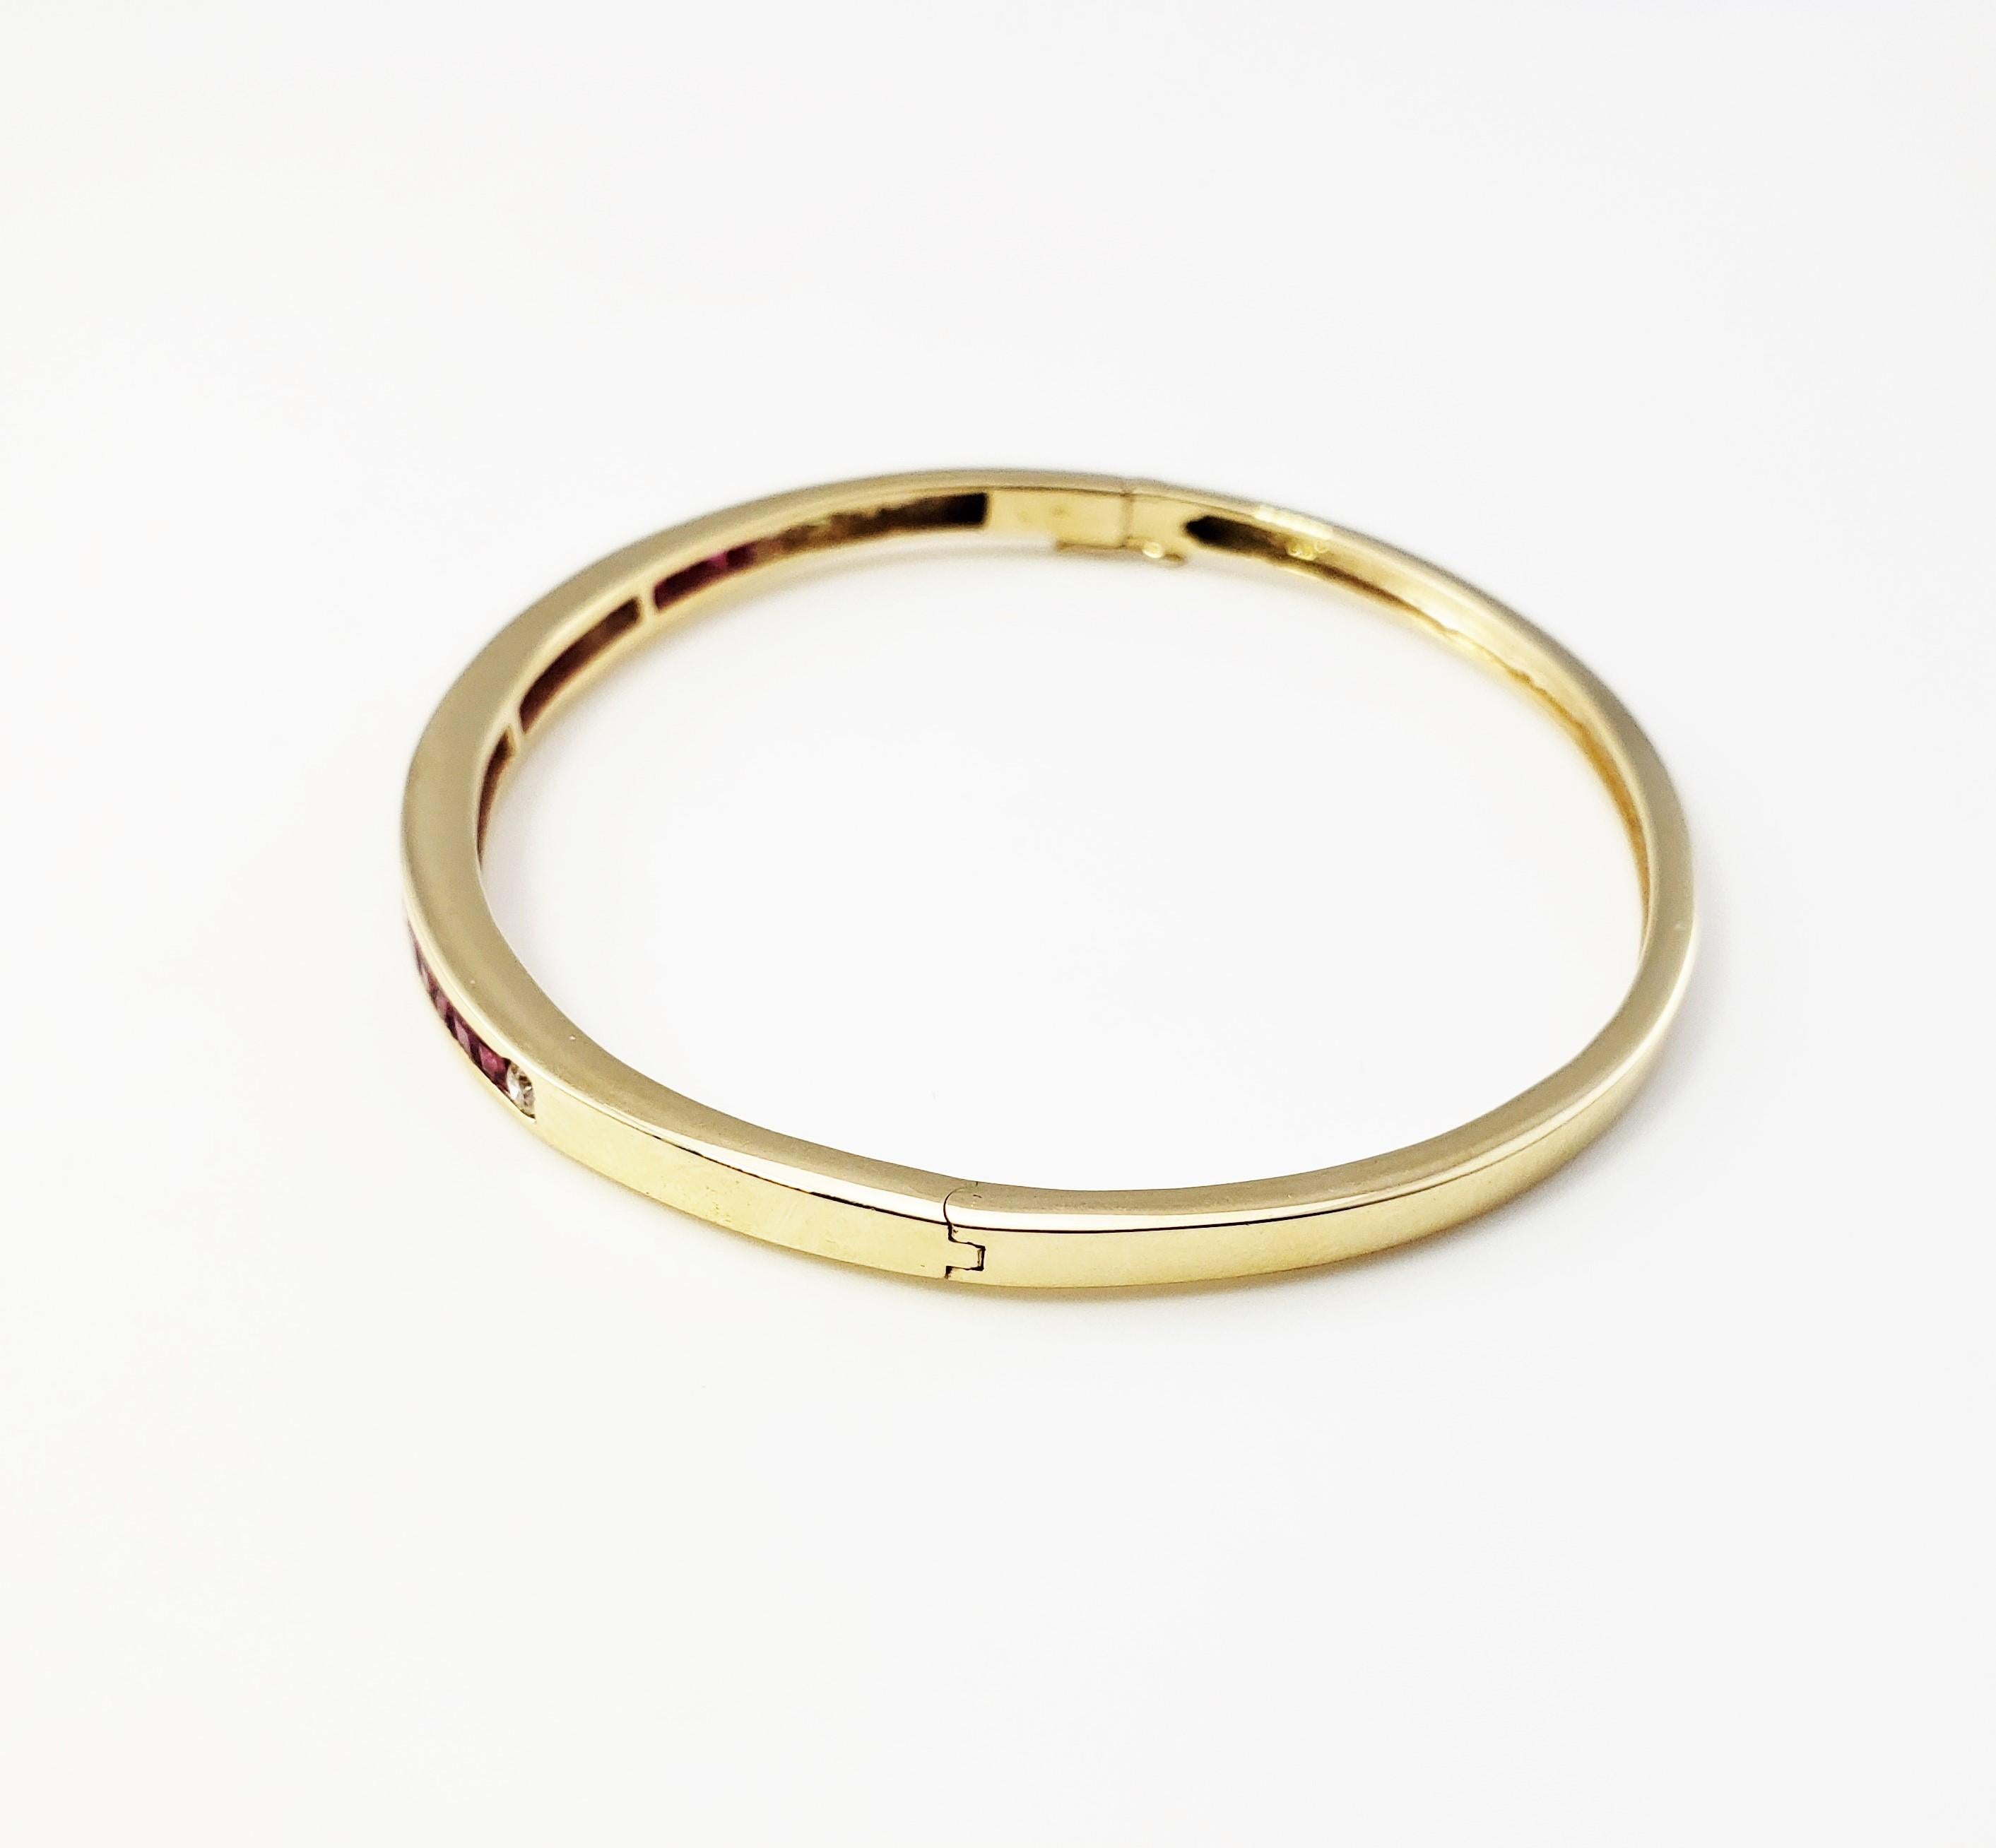 Vintage 14 Karat Yellow Gold Ruby and Diamond Bangle Bracelet

This stunning hinged bangle bracelet features 20 princess cut rubies and five round brilliant cut diamonds set in elegant 14K yellow gold. Width: 4 mm. Safety closure.

Approximate total